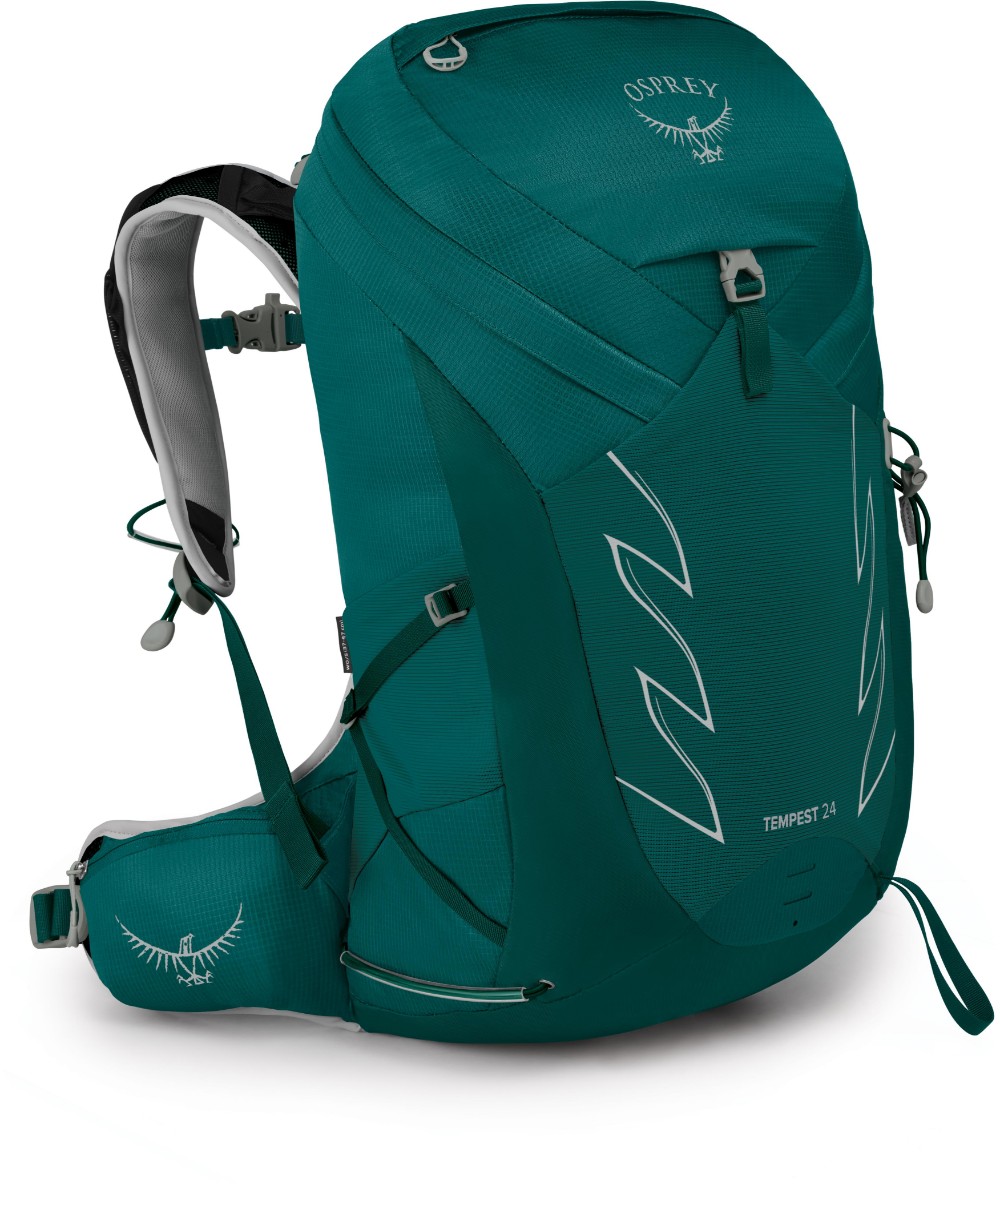 Tempest 24 Womens Backpack image 0